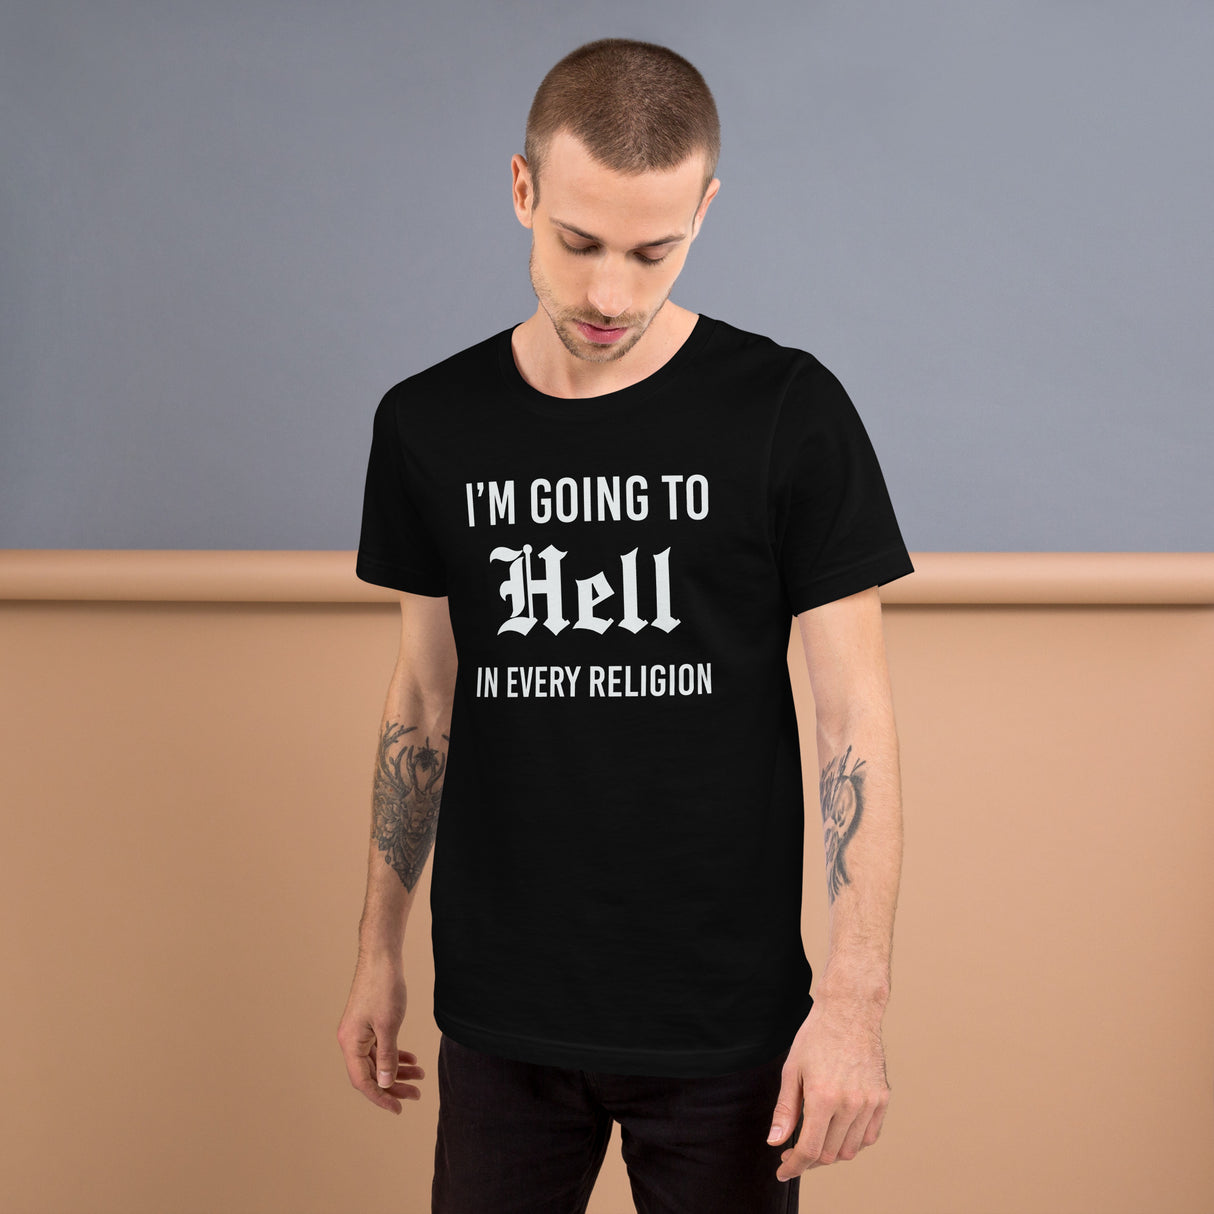 I'm Going To Hell in Every Religion Men's Shirt